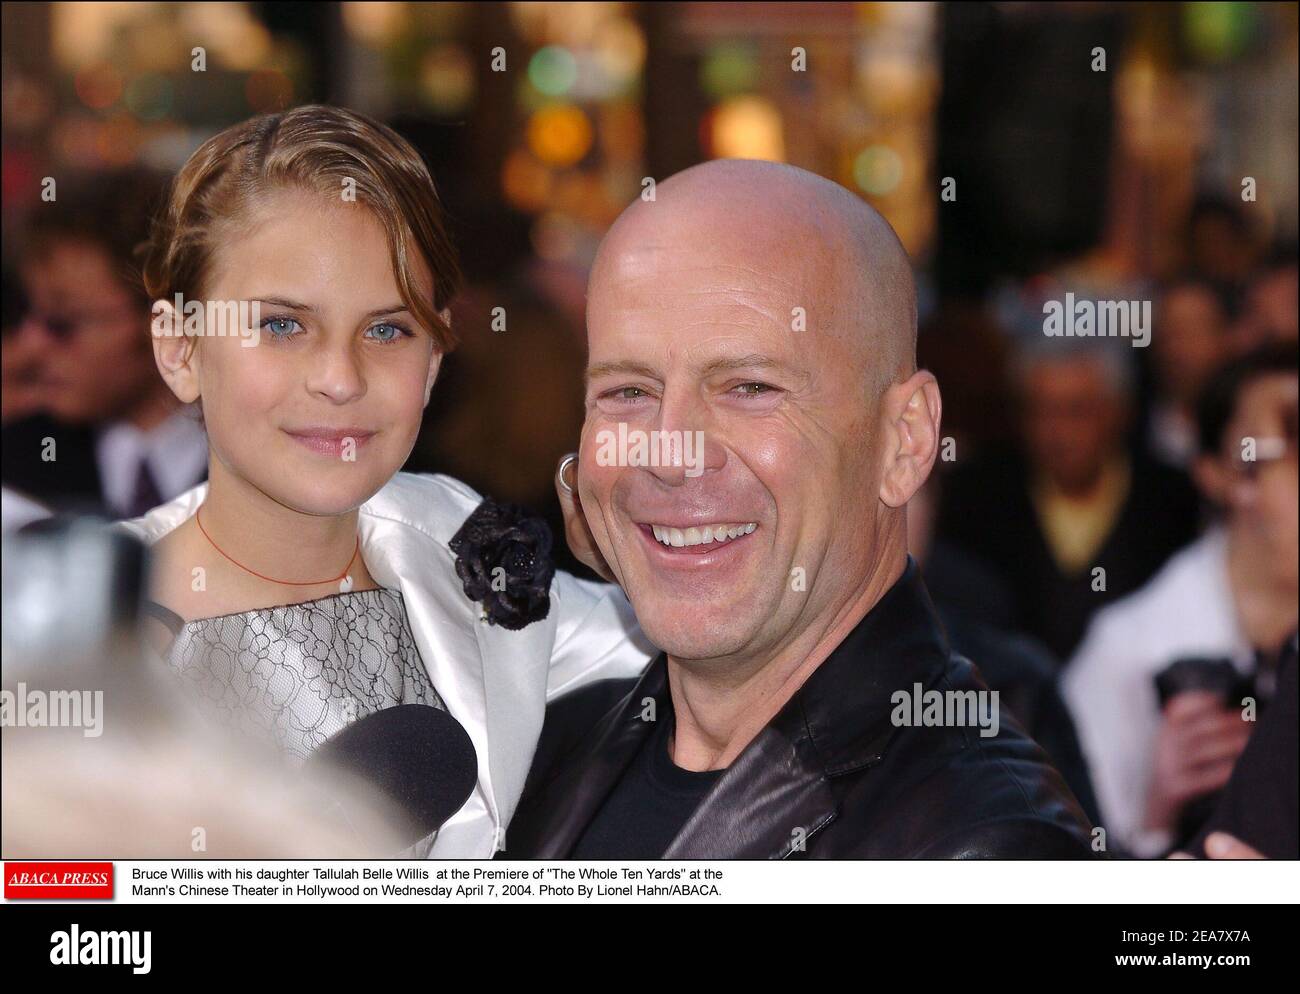 Bruce Willis with his daughter Tallulah Belle Willis at the Premiere of ...